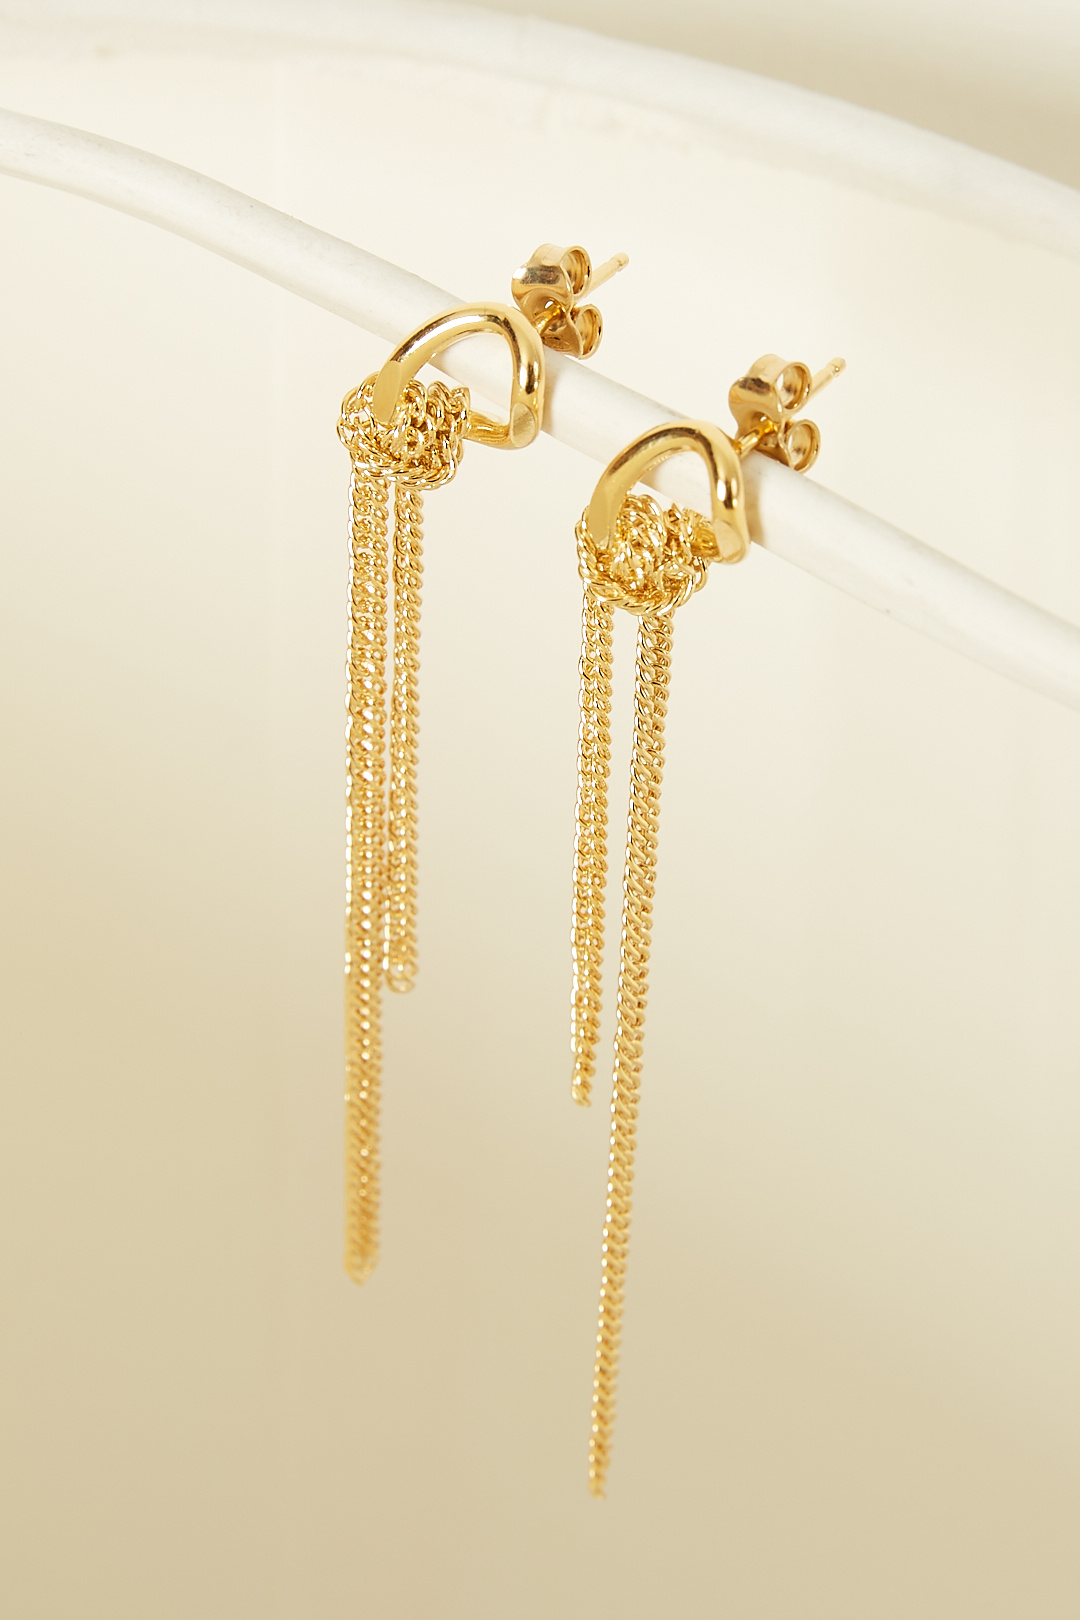 Studio Collect - Knot earrings